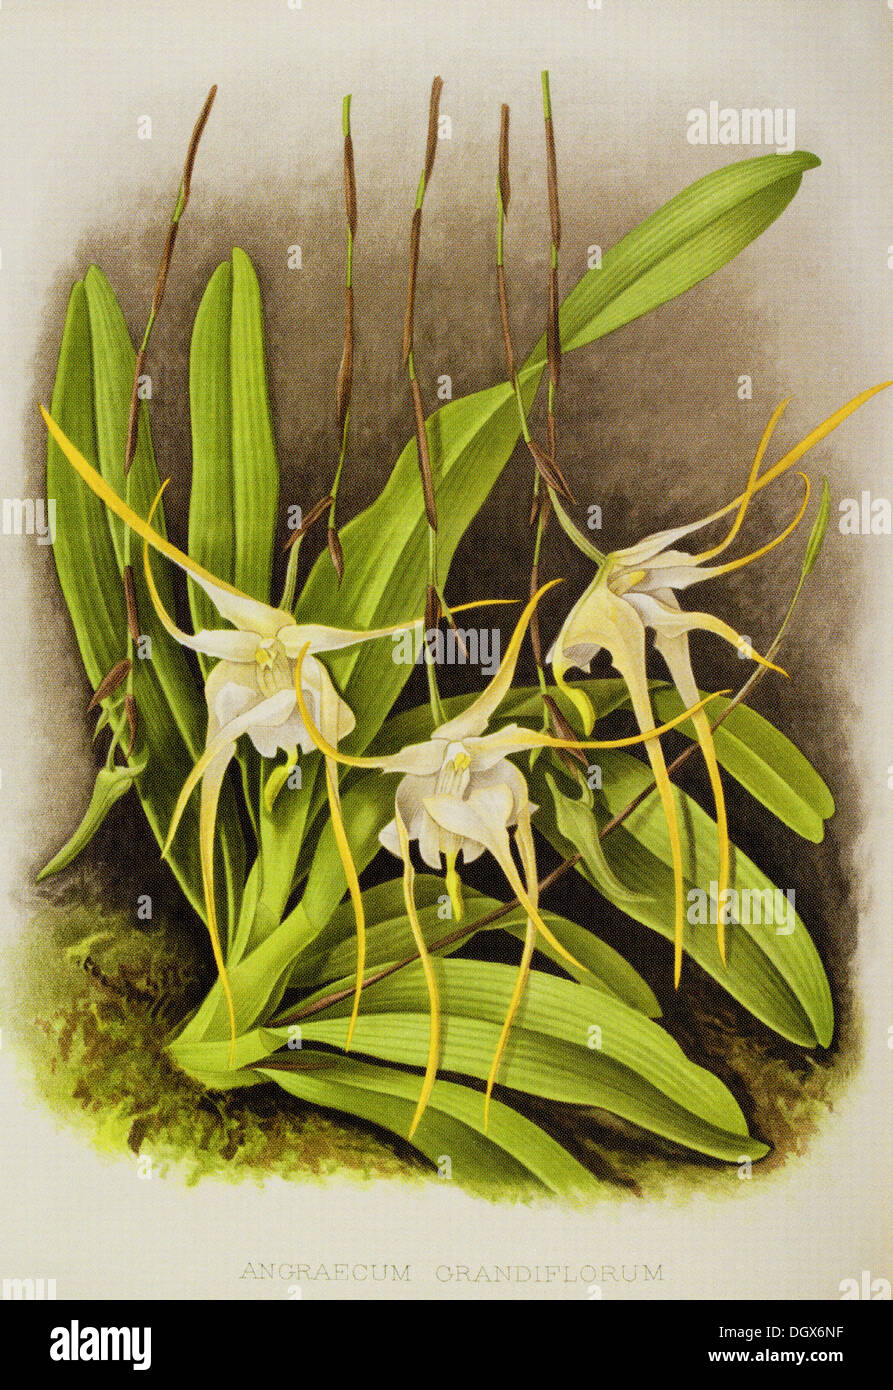 Orchids, Aeranthus grandiflora - by John N. Fitch, 1897 Stock Photo